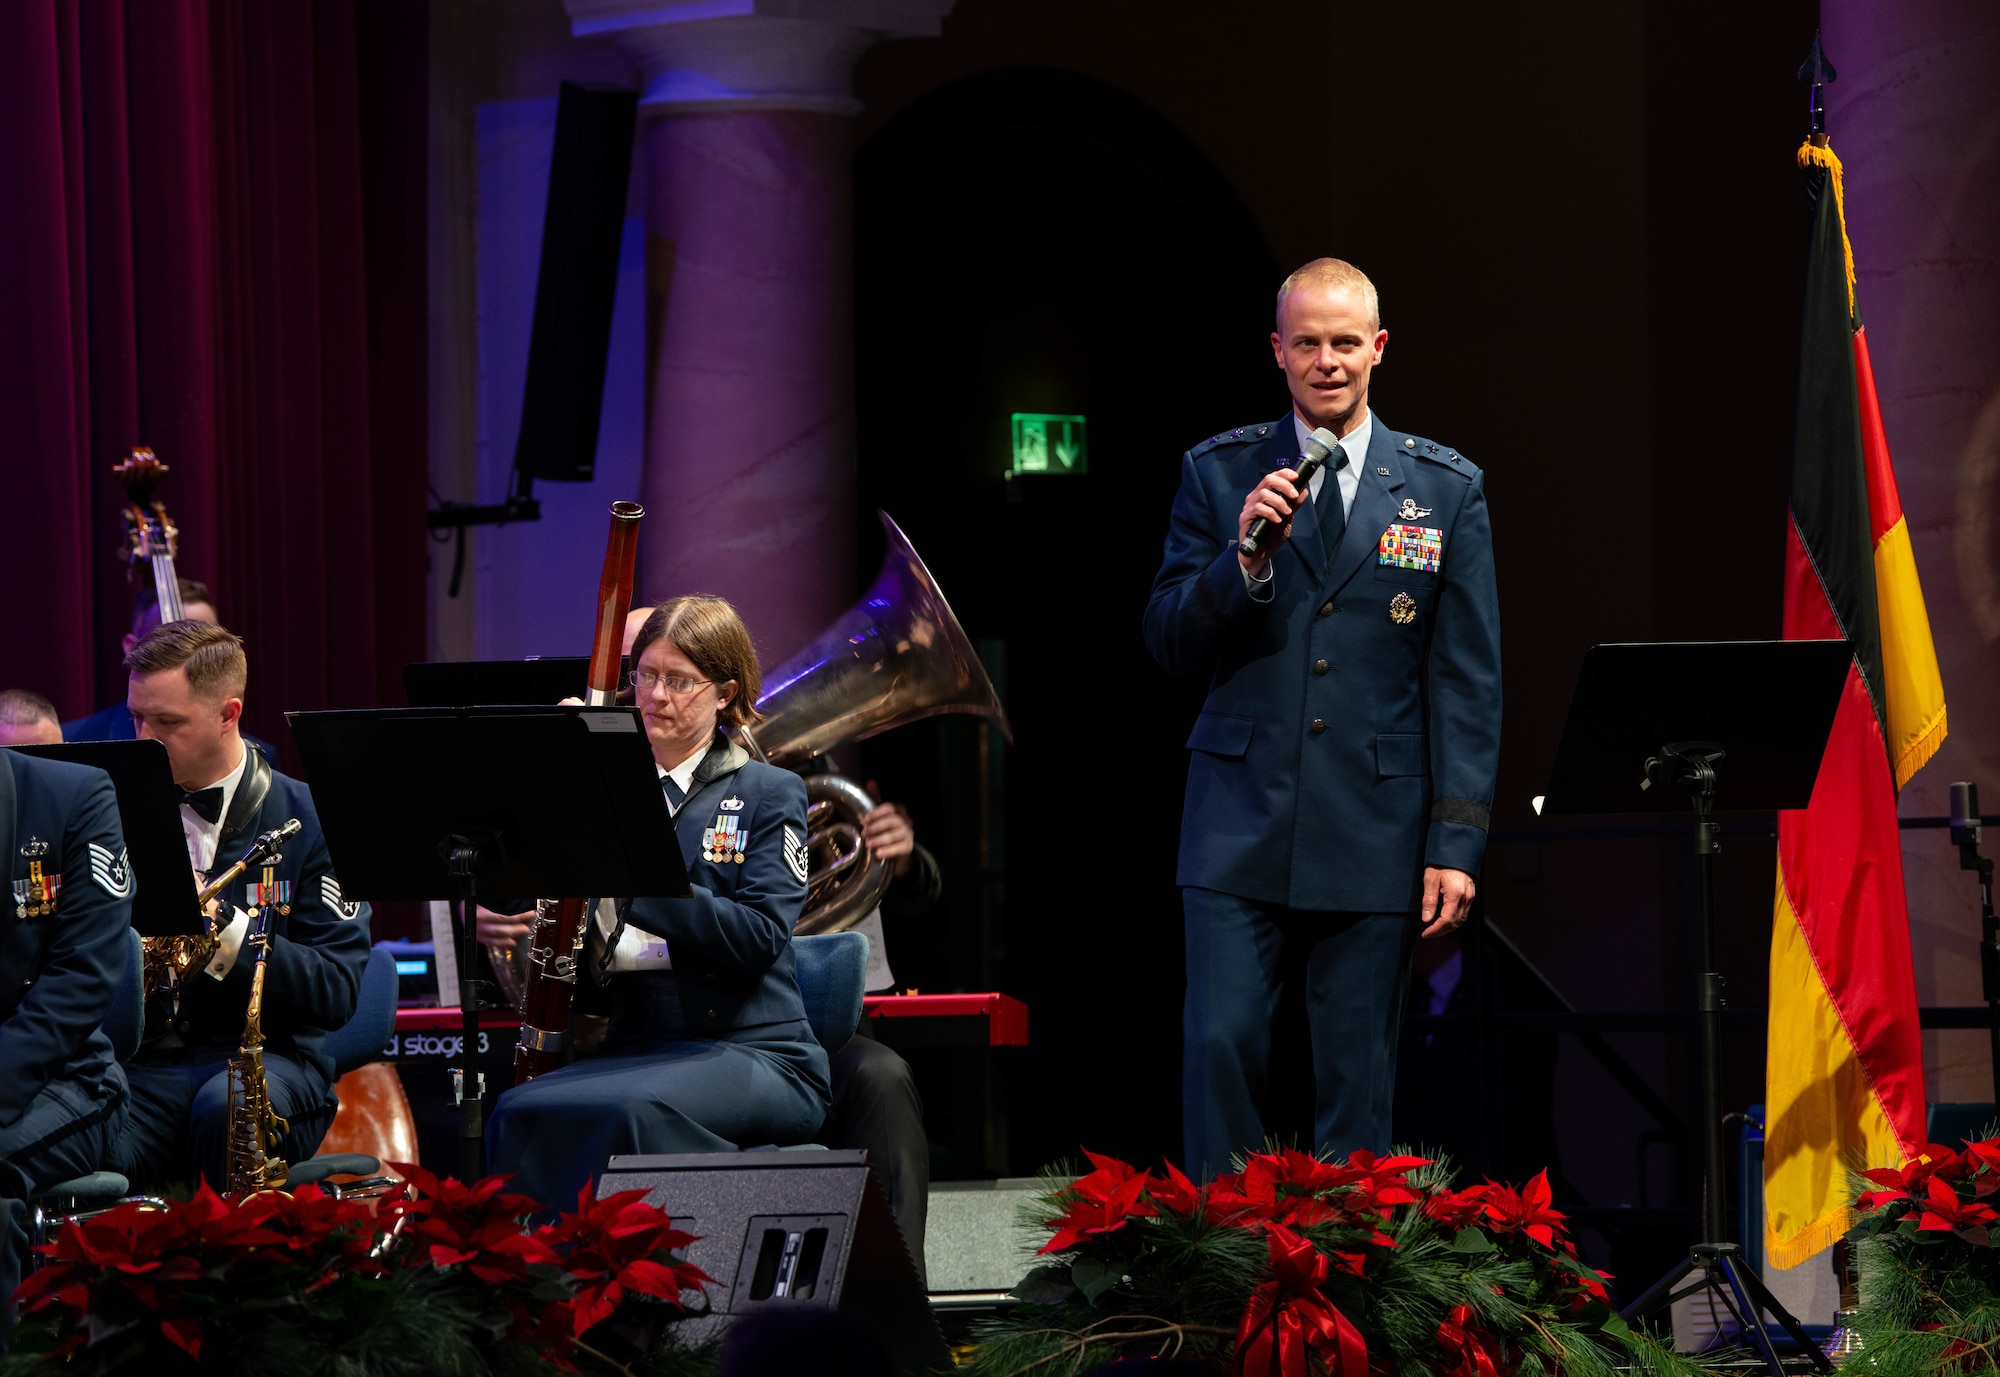 Third air force commander gives opening remarks at holiday concert